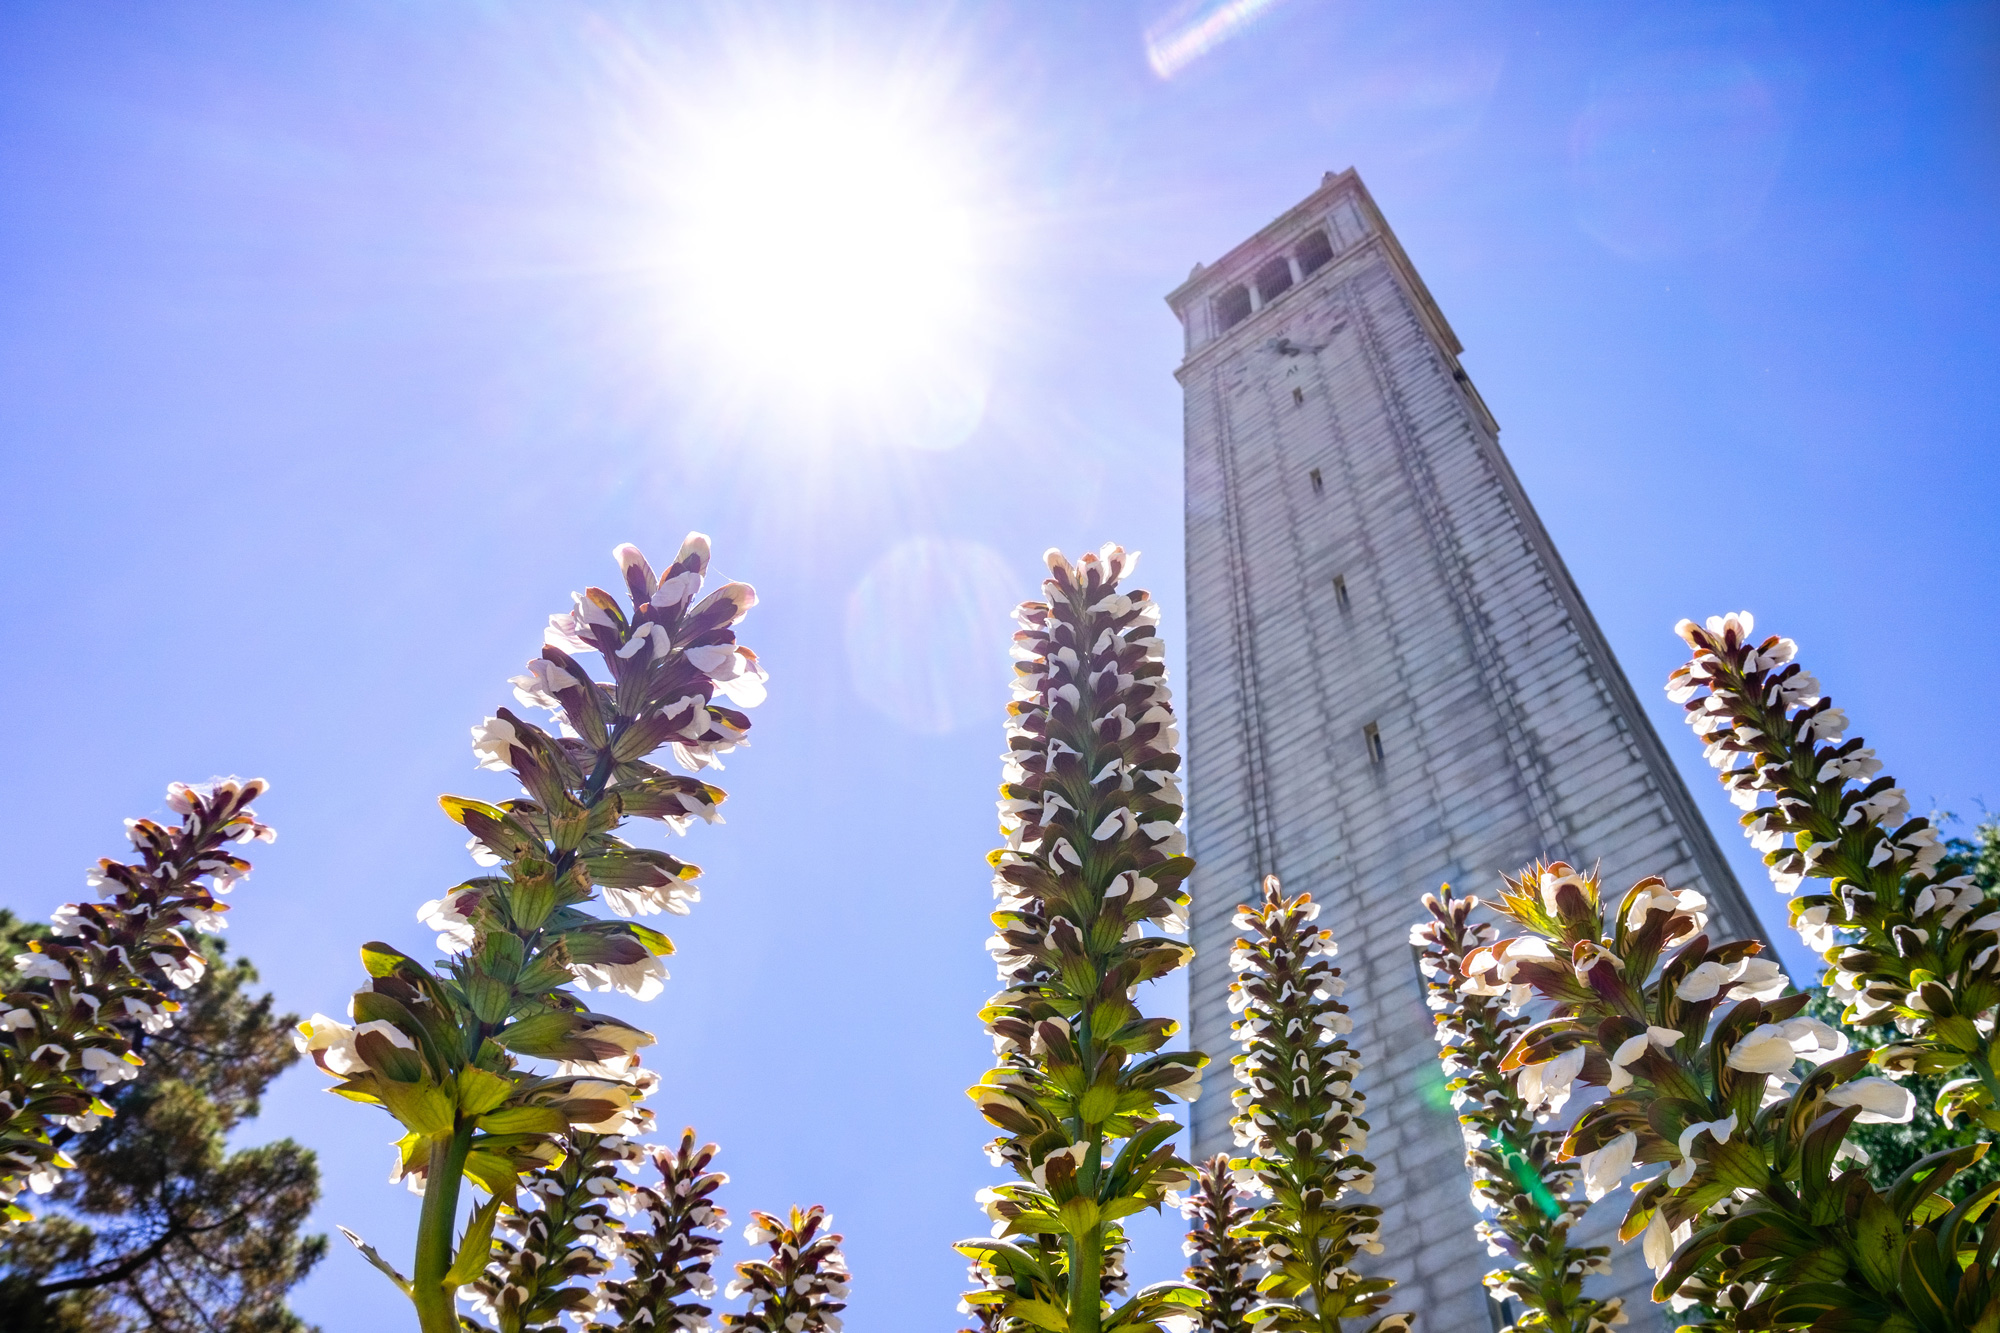 photo - Higher Education building tower with flowers, UC Berkeley